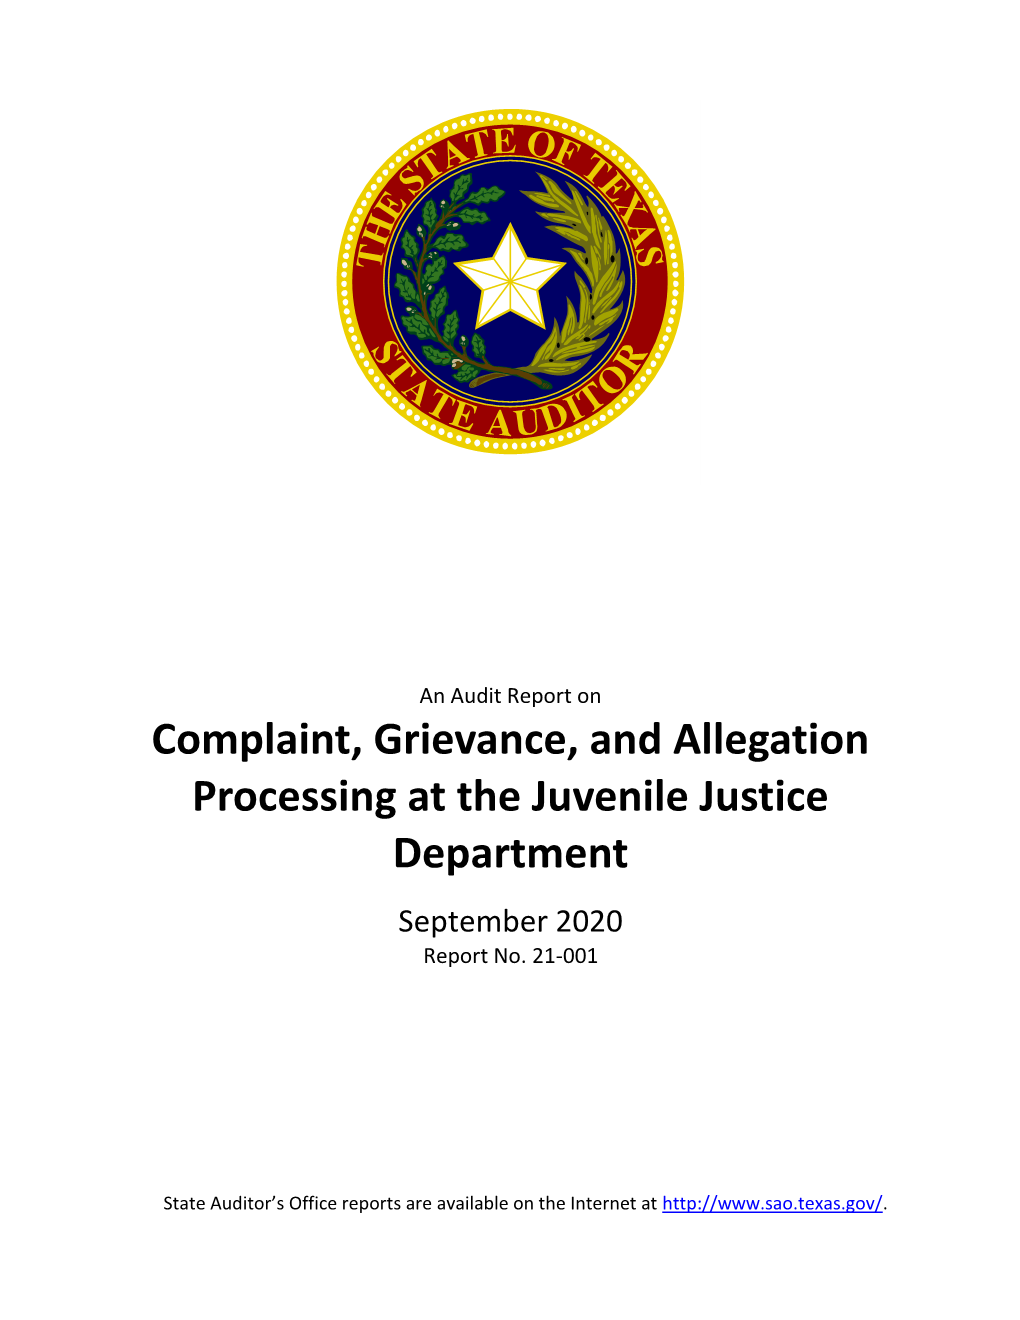 An Audit Report on Complaint, Grievance, and Allegation Processing at the Juvenile Justice Department September 2020 Report No